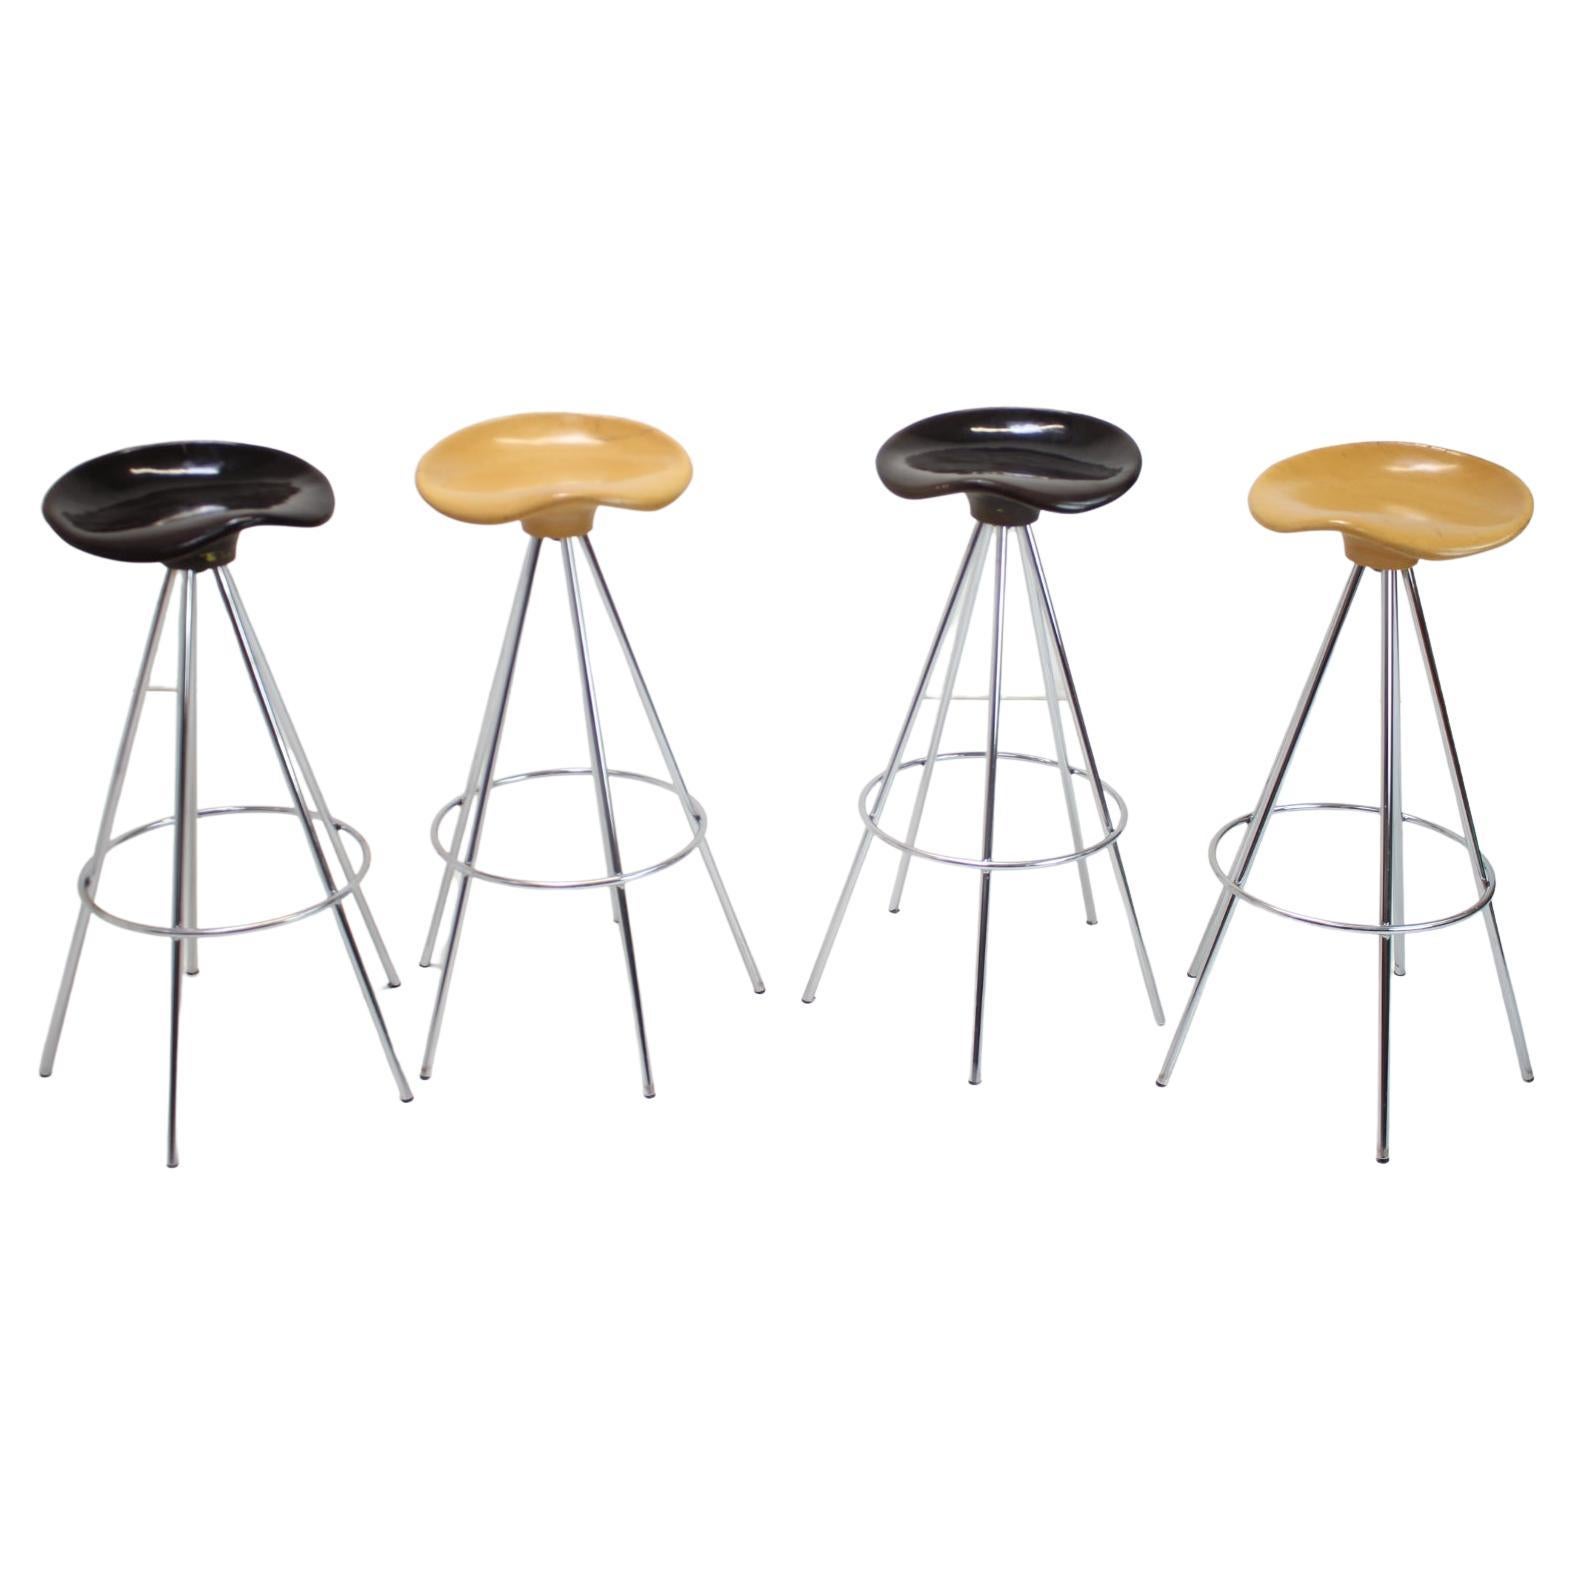 Set of Four Beech Jamaica Bar Stools by Pepe Cortés, 1990s For Sale